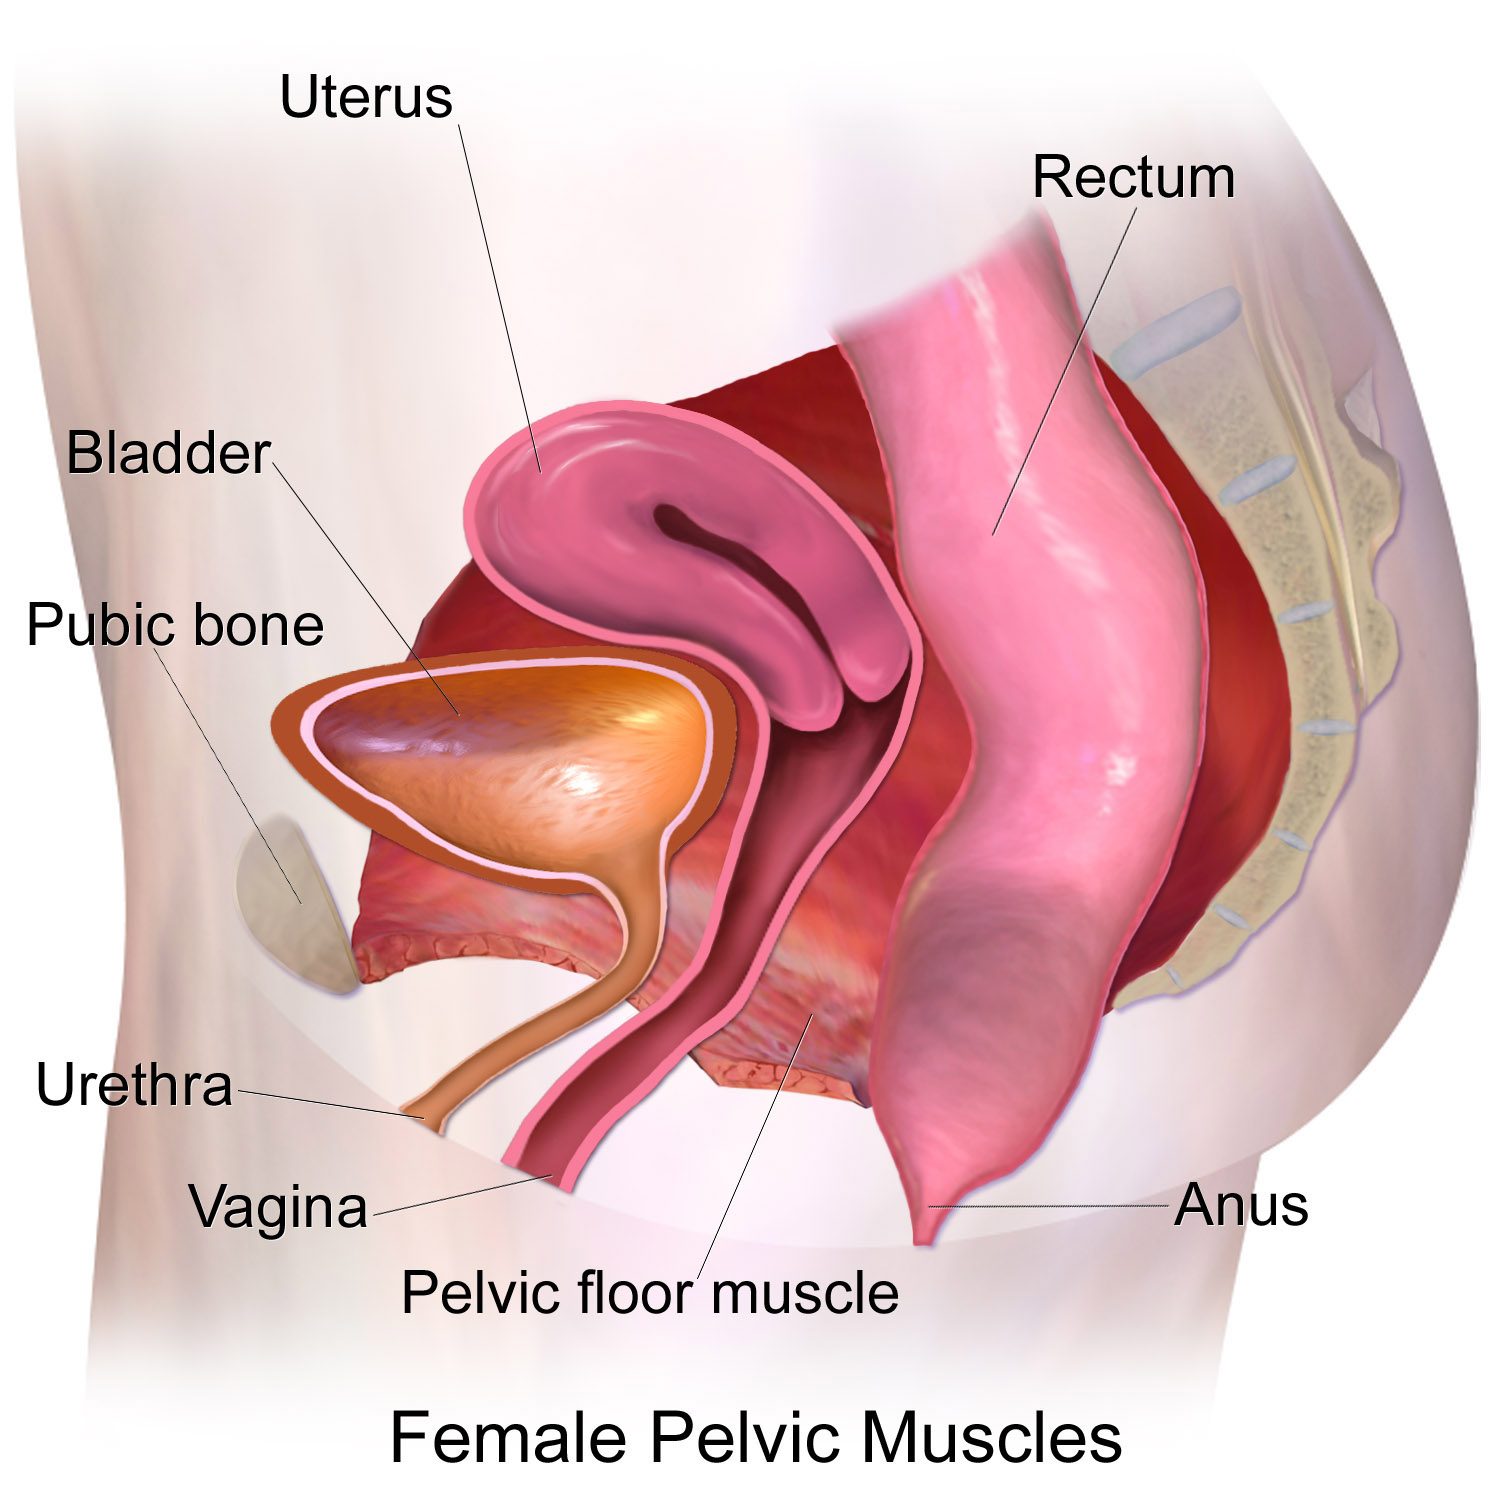 Diagram of the pelvic muscles